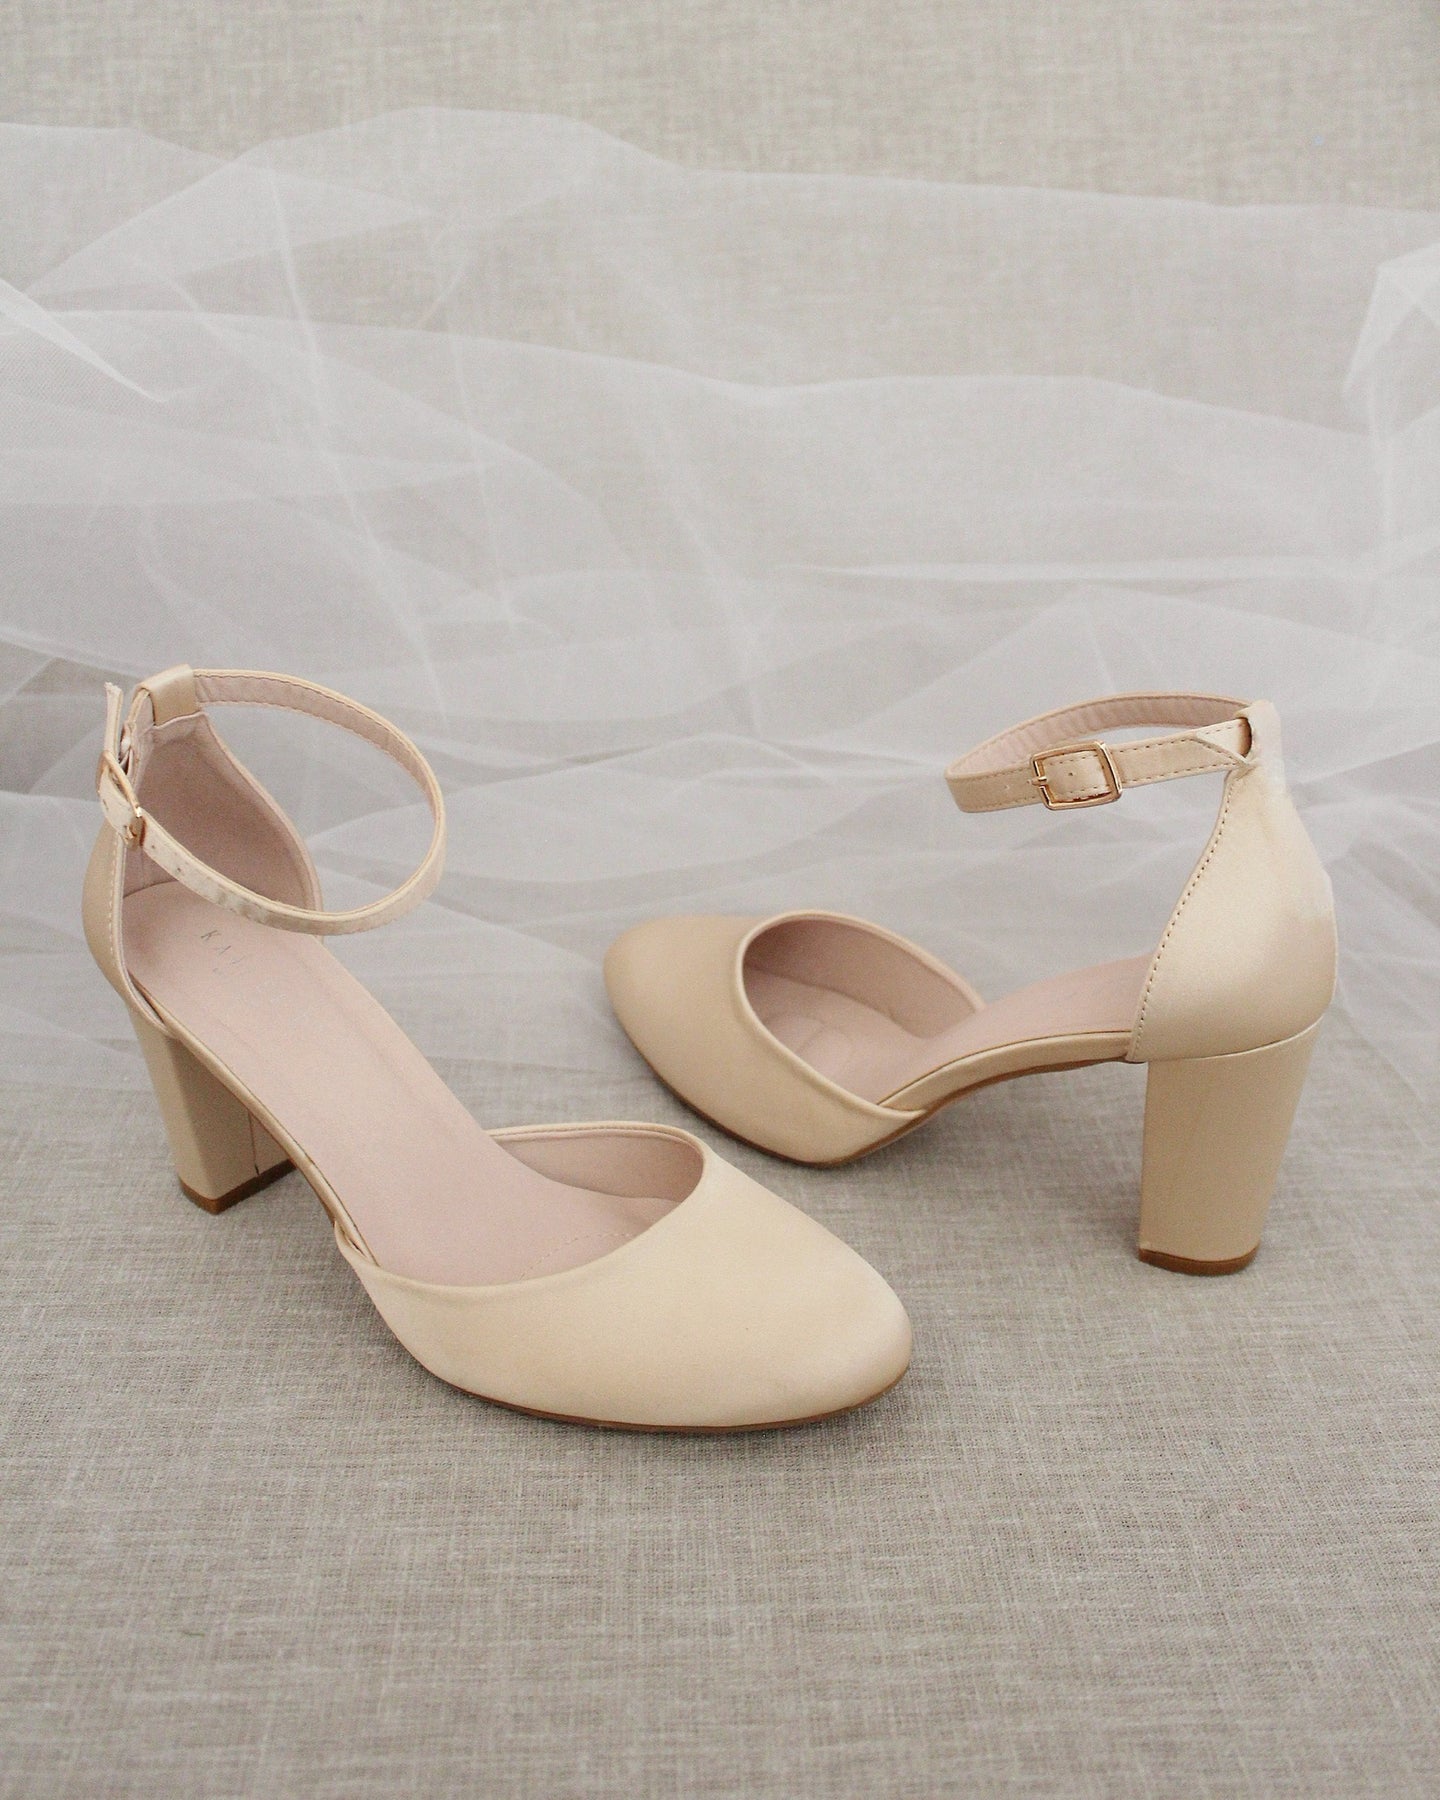 Champagne Satin Block Heel with Ankle Strap - Wedding Shoes ...